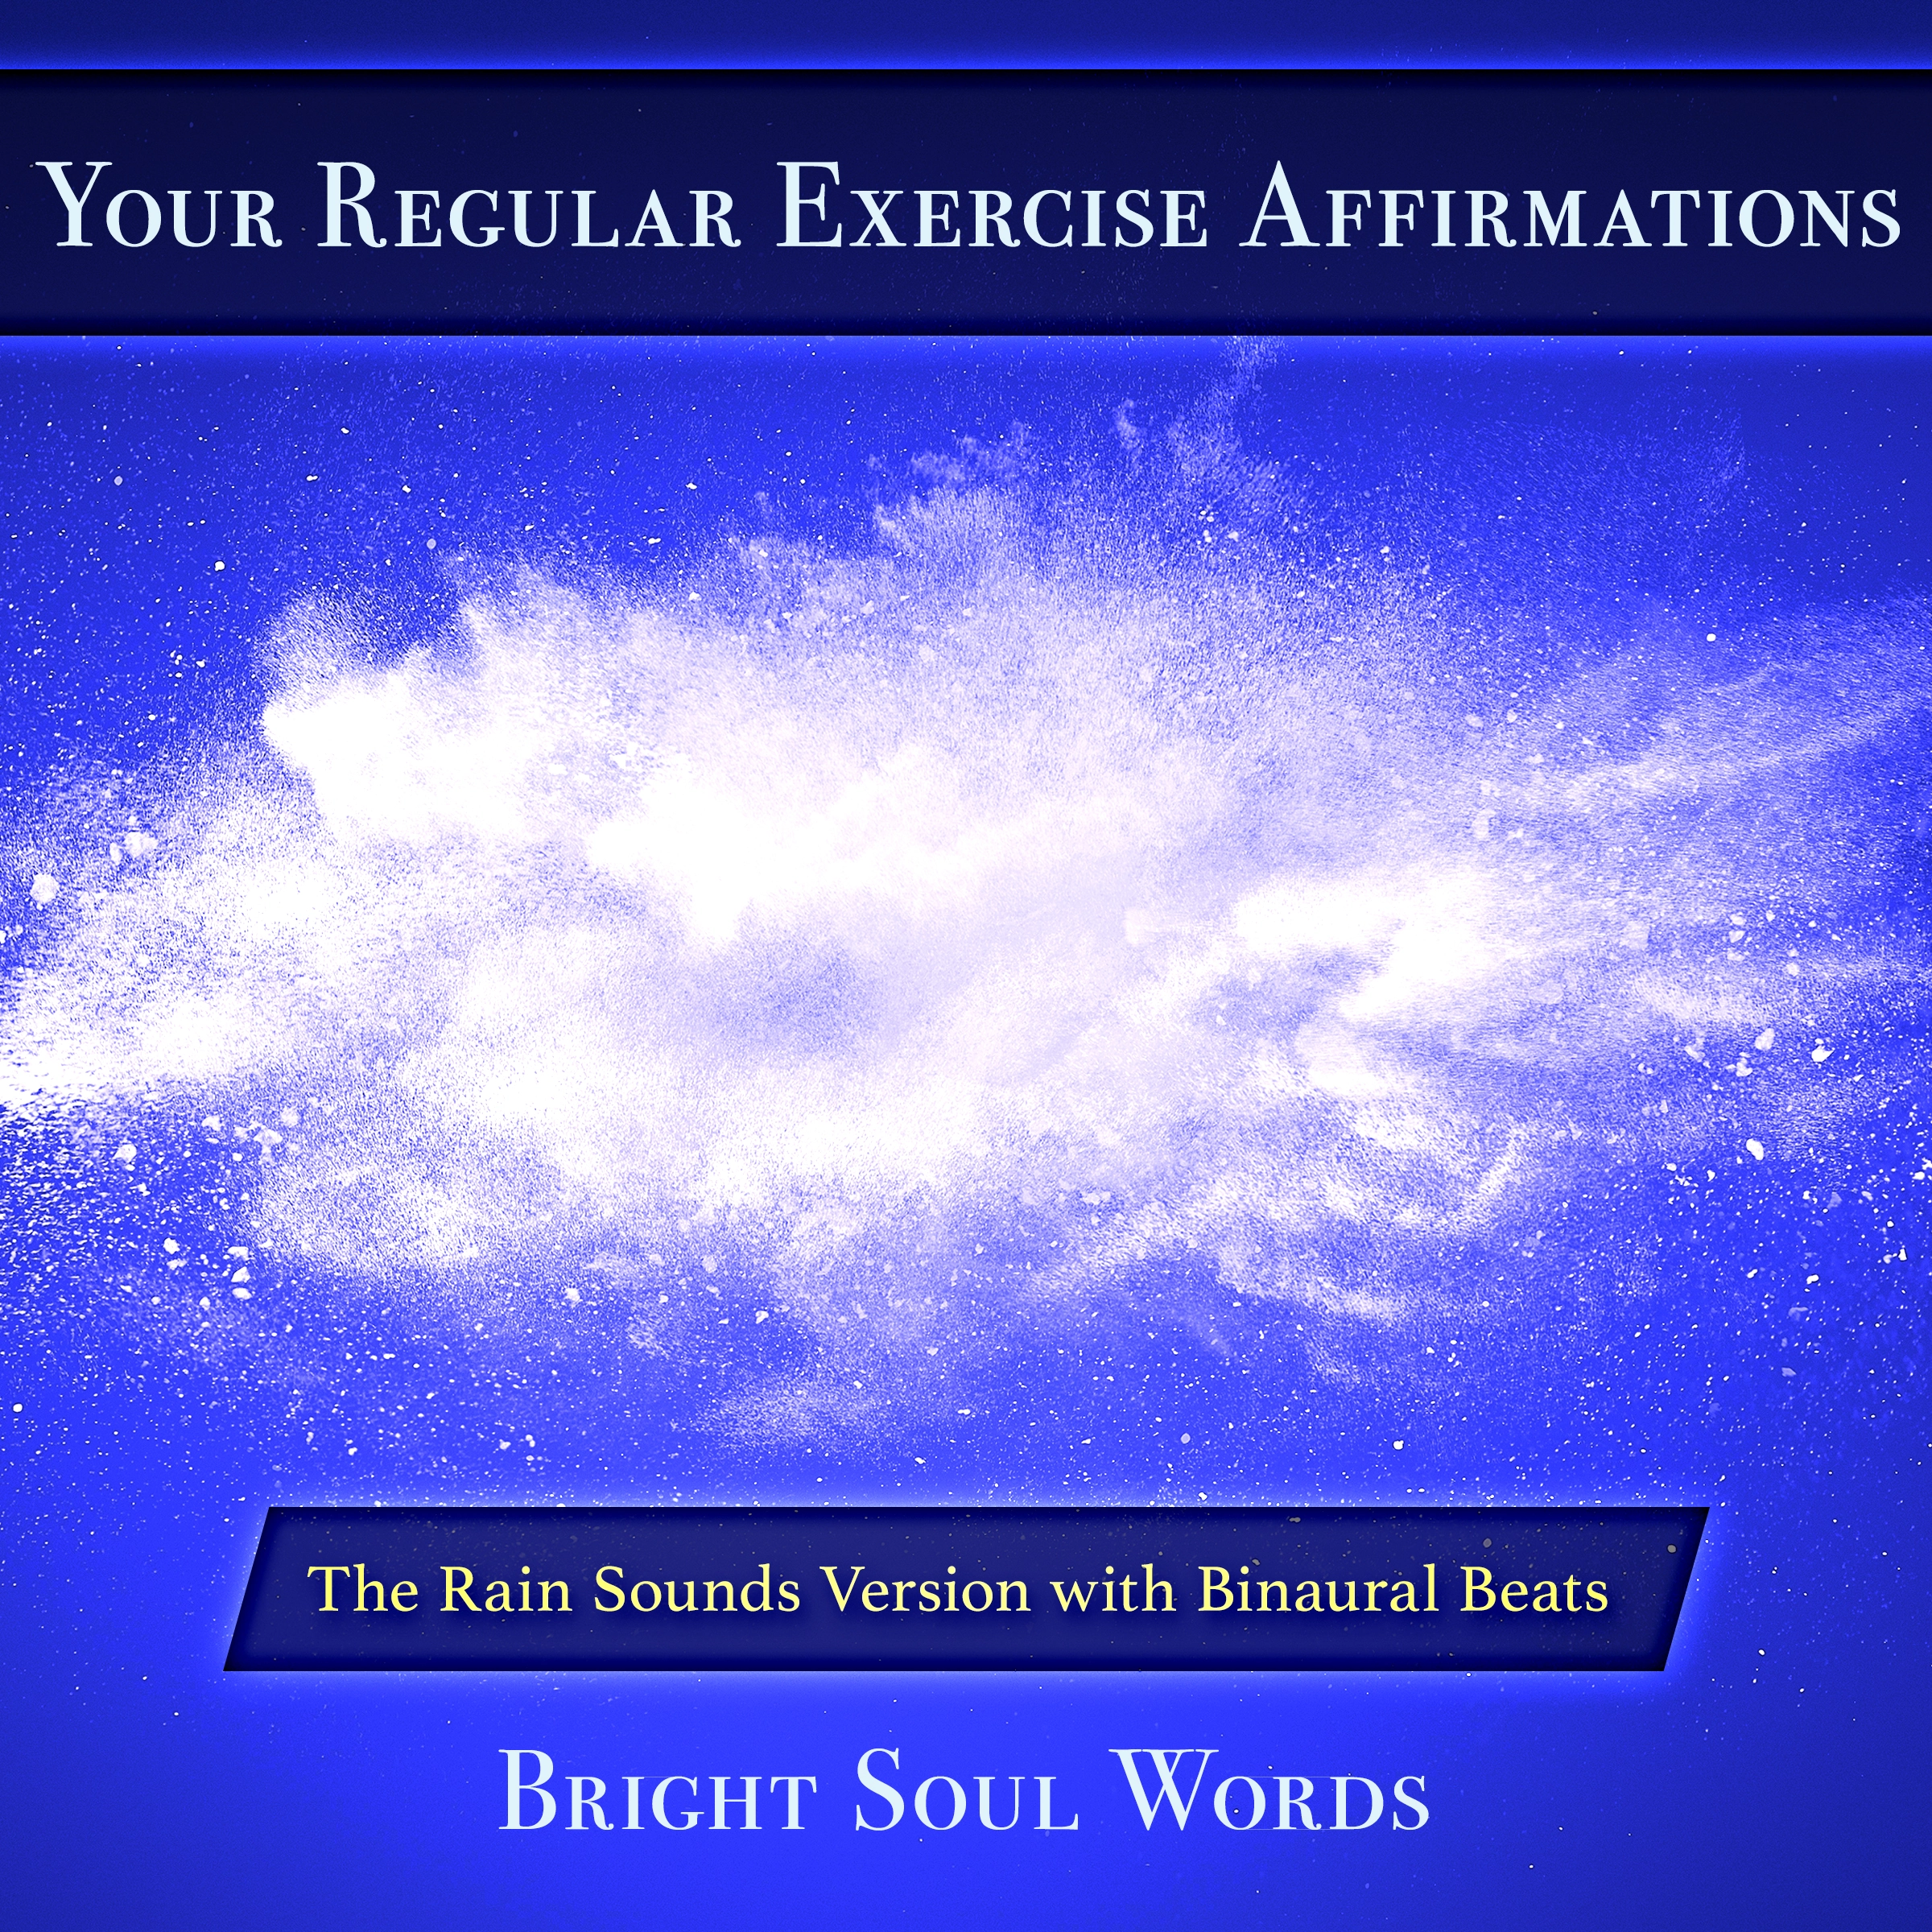 Your Regular Exercise Affirmations: The Rain Sounds Version with Binaural Beats by Bright Soul Words Audiobook